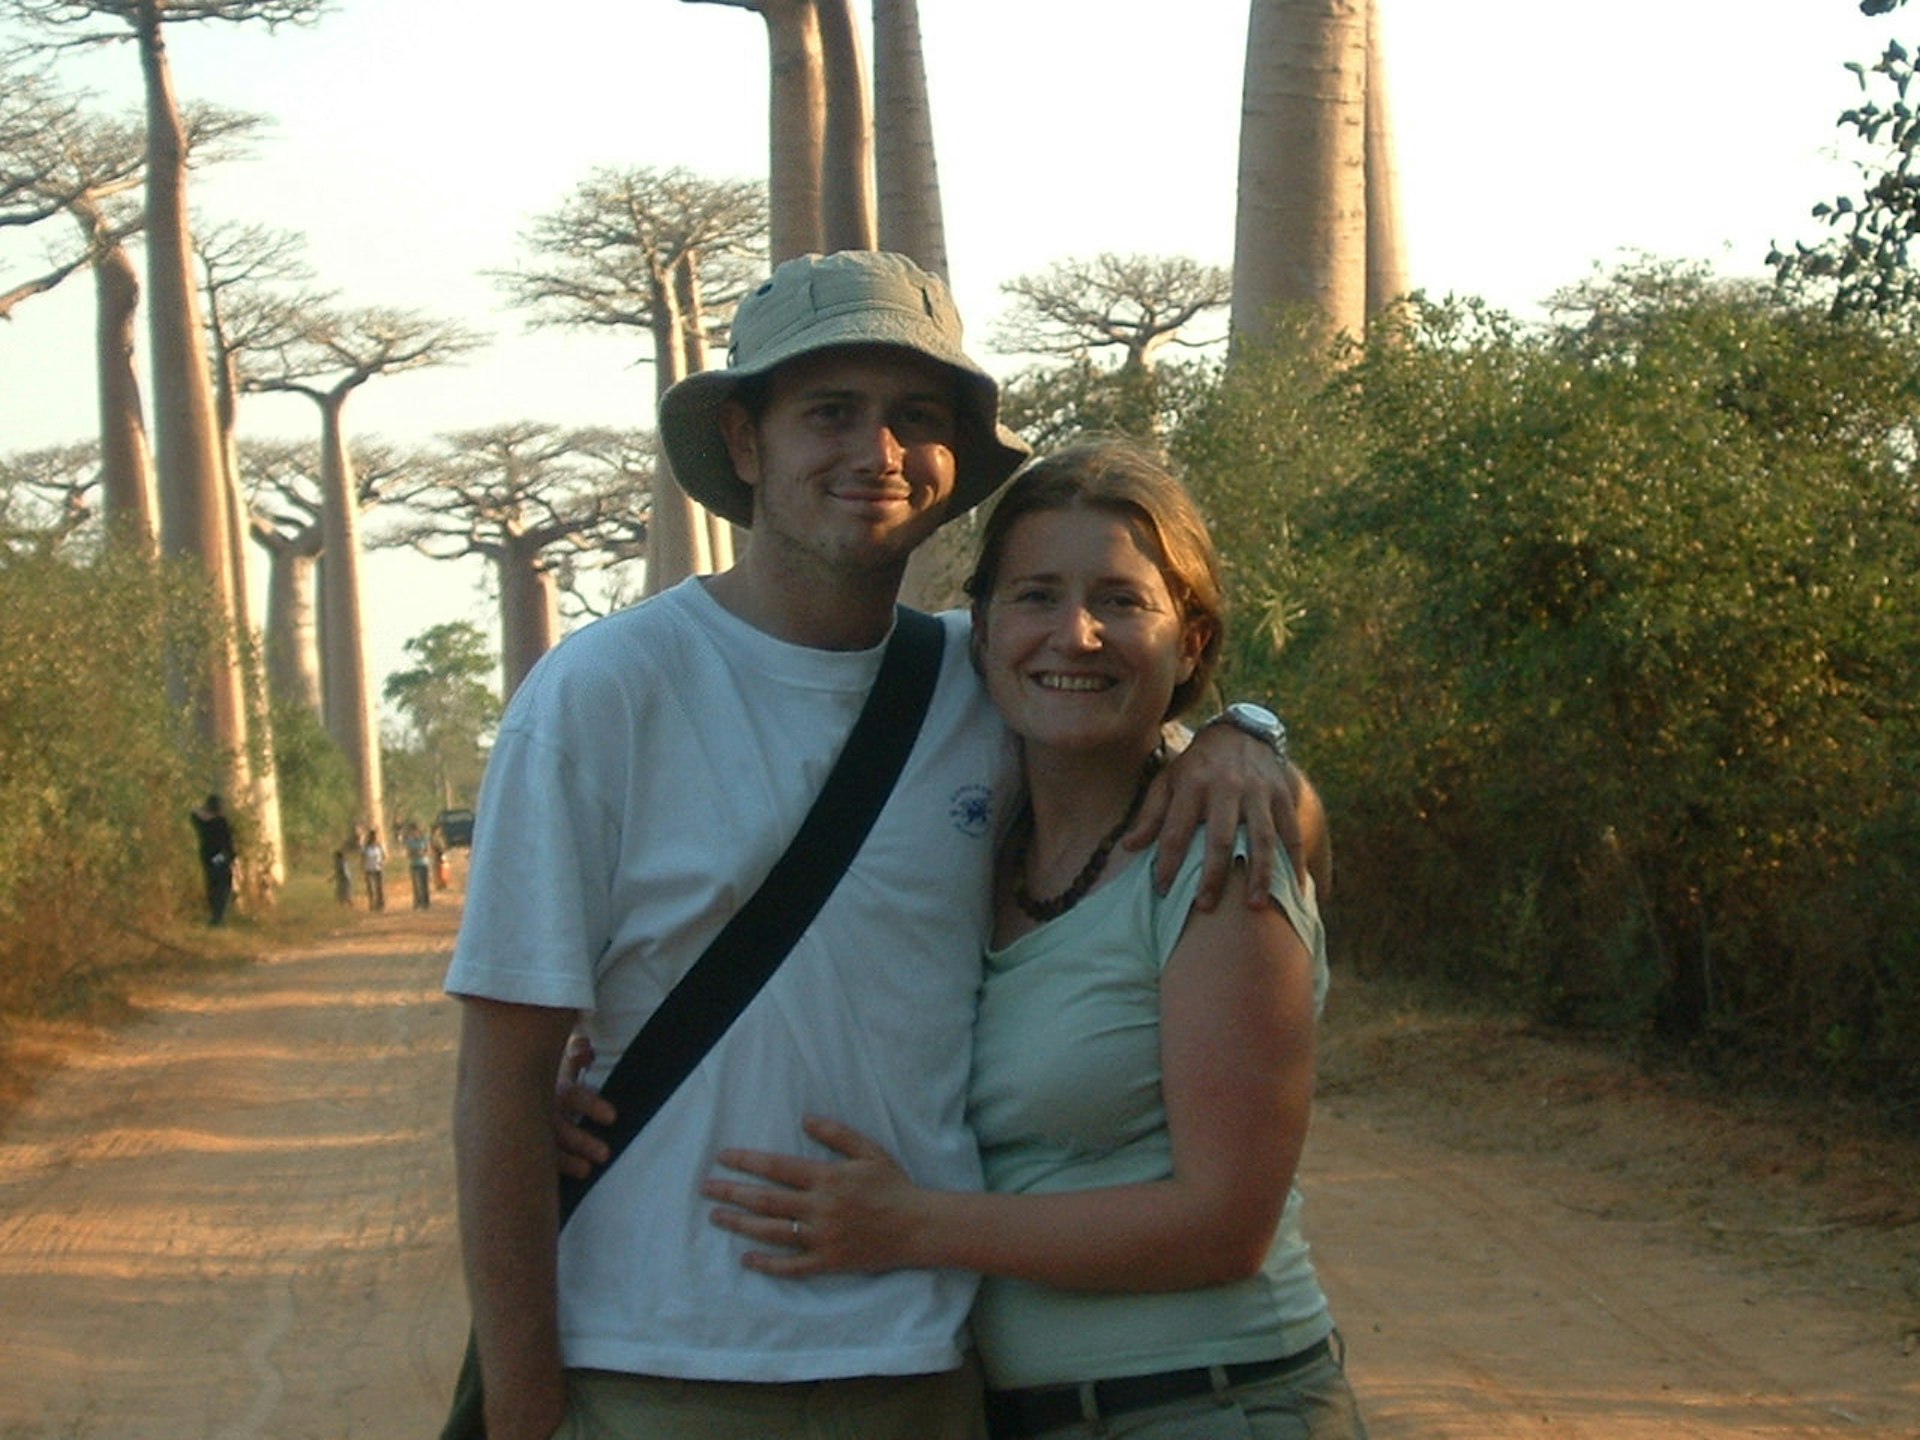 Imogen and Tom Hall pose in front of the baobab trees in Madagascar.